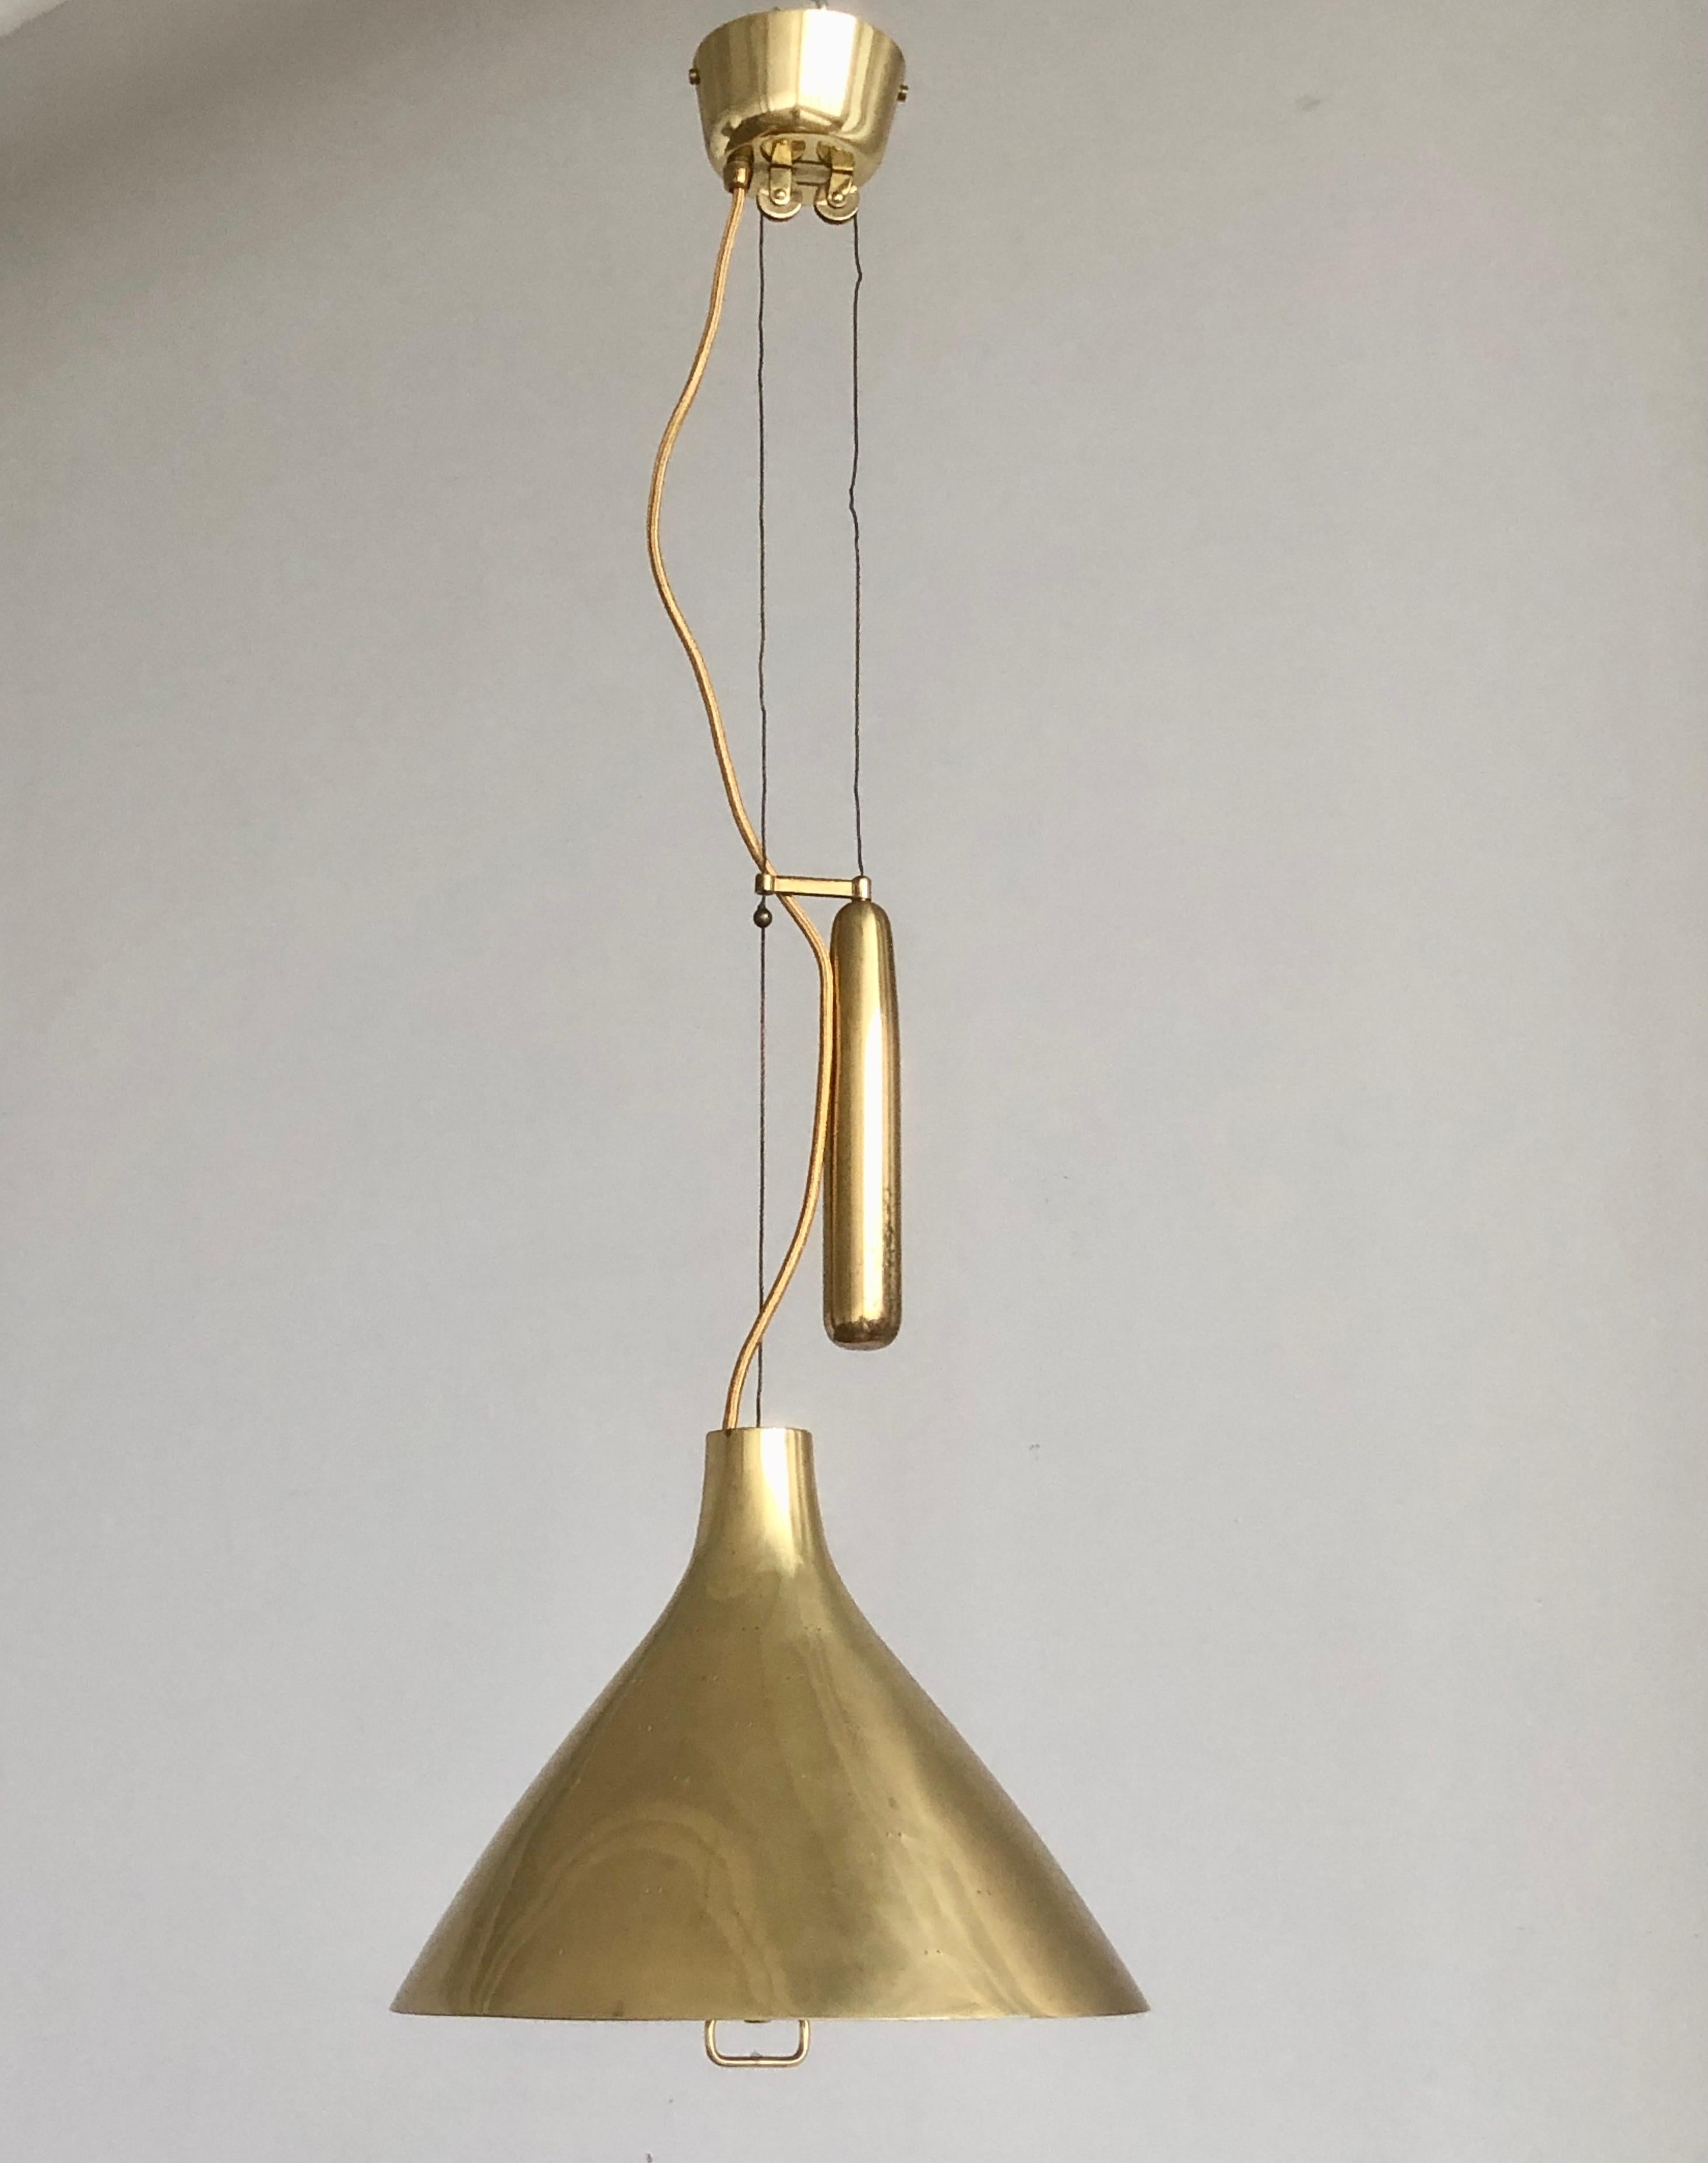 Large lighting pendant with counterweight designed by Paavo Tynell.
Perforated polished brass shade with frosted glass diffuser. Variation of model A1982, featured at Idman catalogue.  The height adjustable fro 40